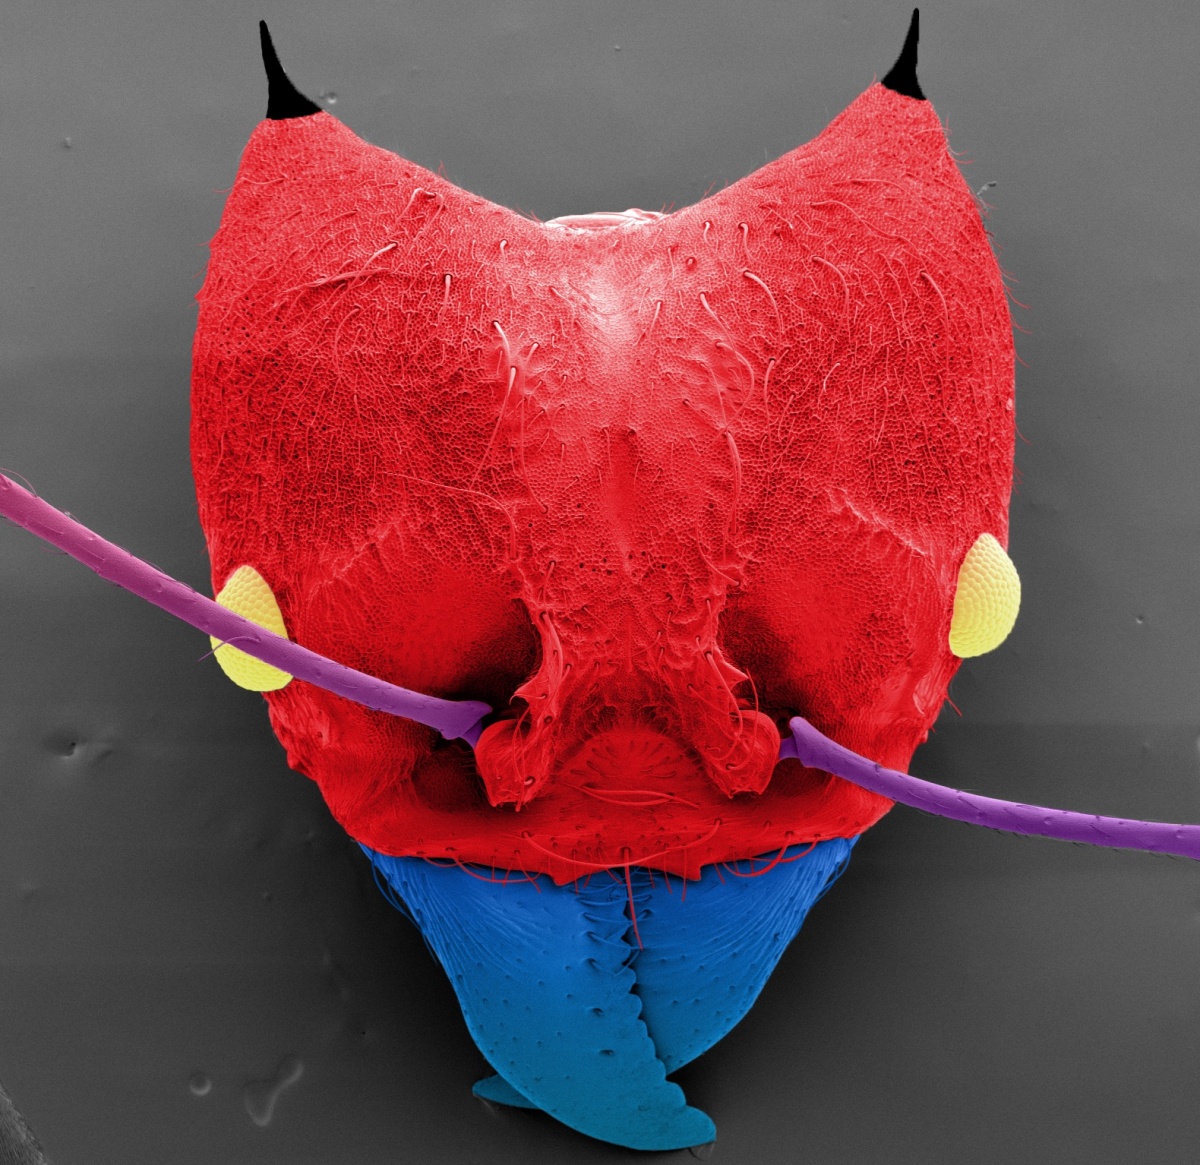 UNH microscope image of leafcutter ant head, colorized red and blue